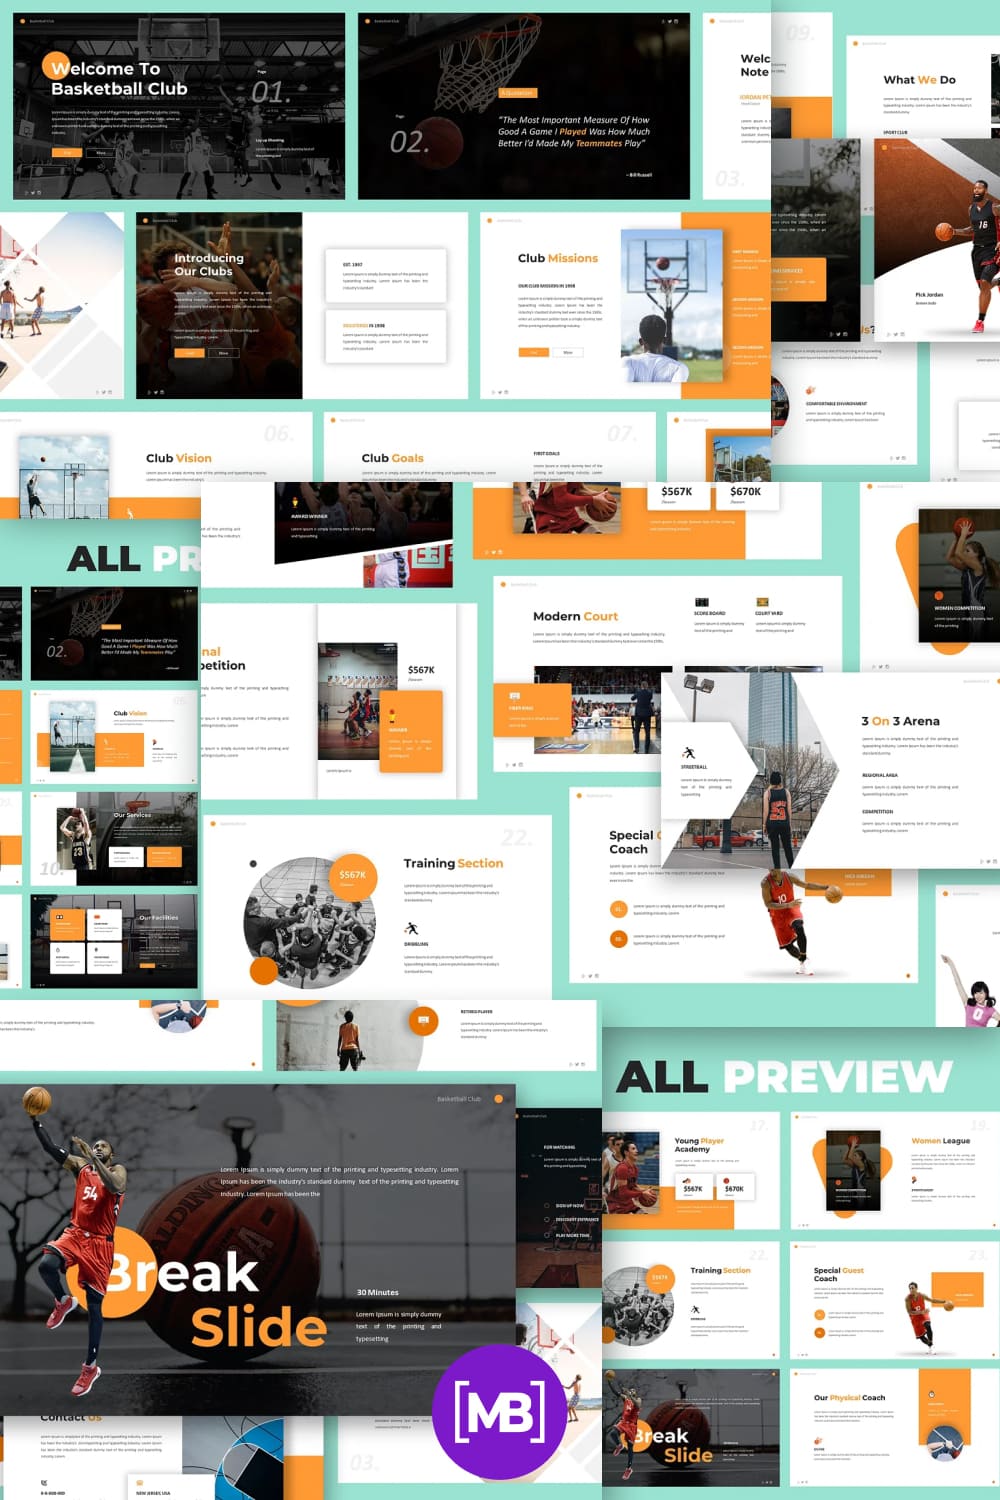 This is a basketball club presentation template that gives you an effective way to introduce your basketball business, come with flat design, clean, classic, minimalist, modern presentation.